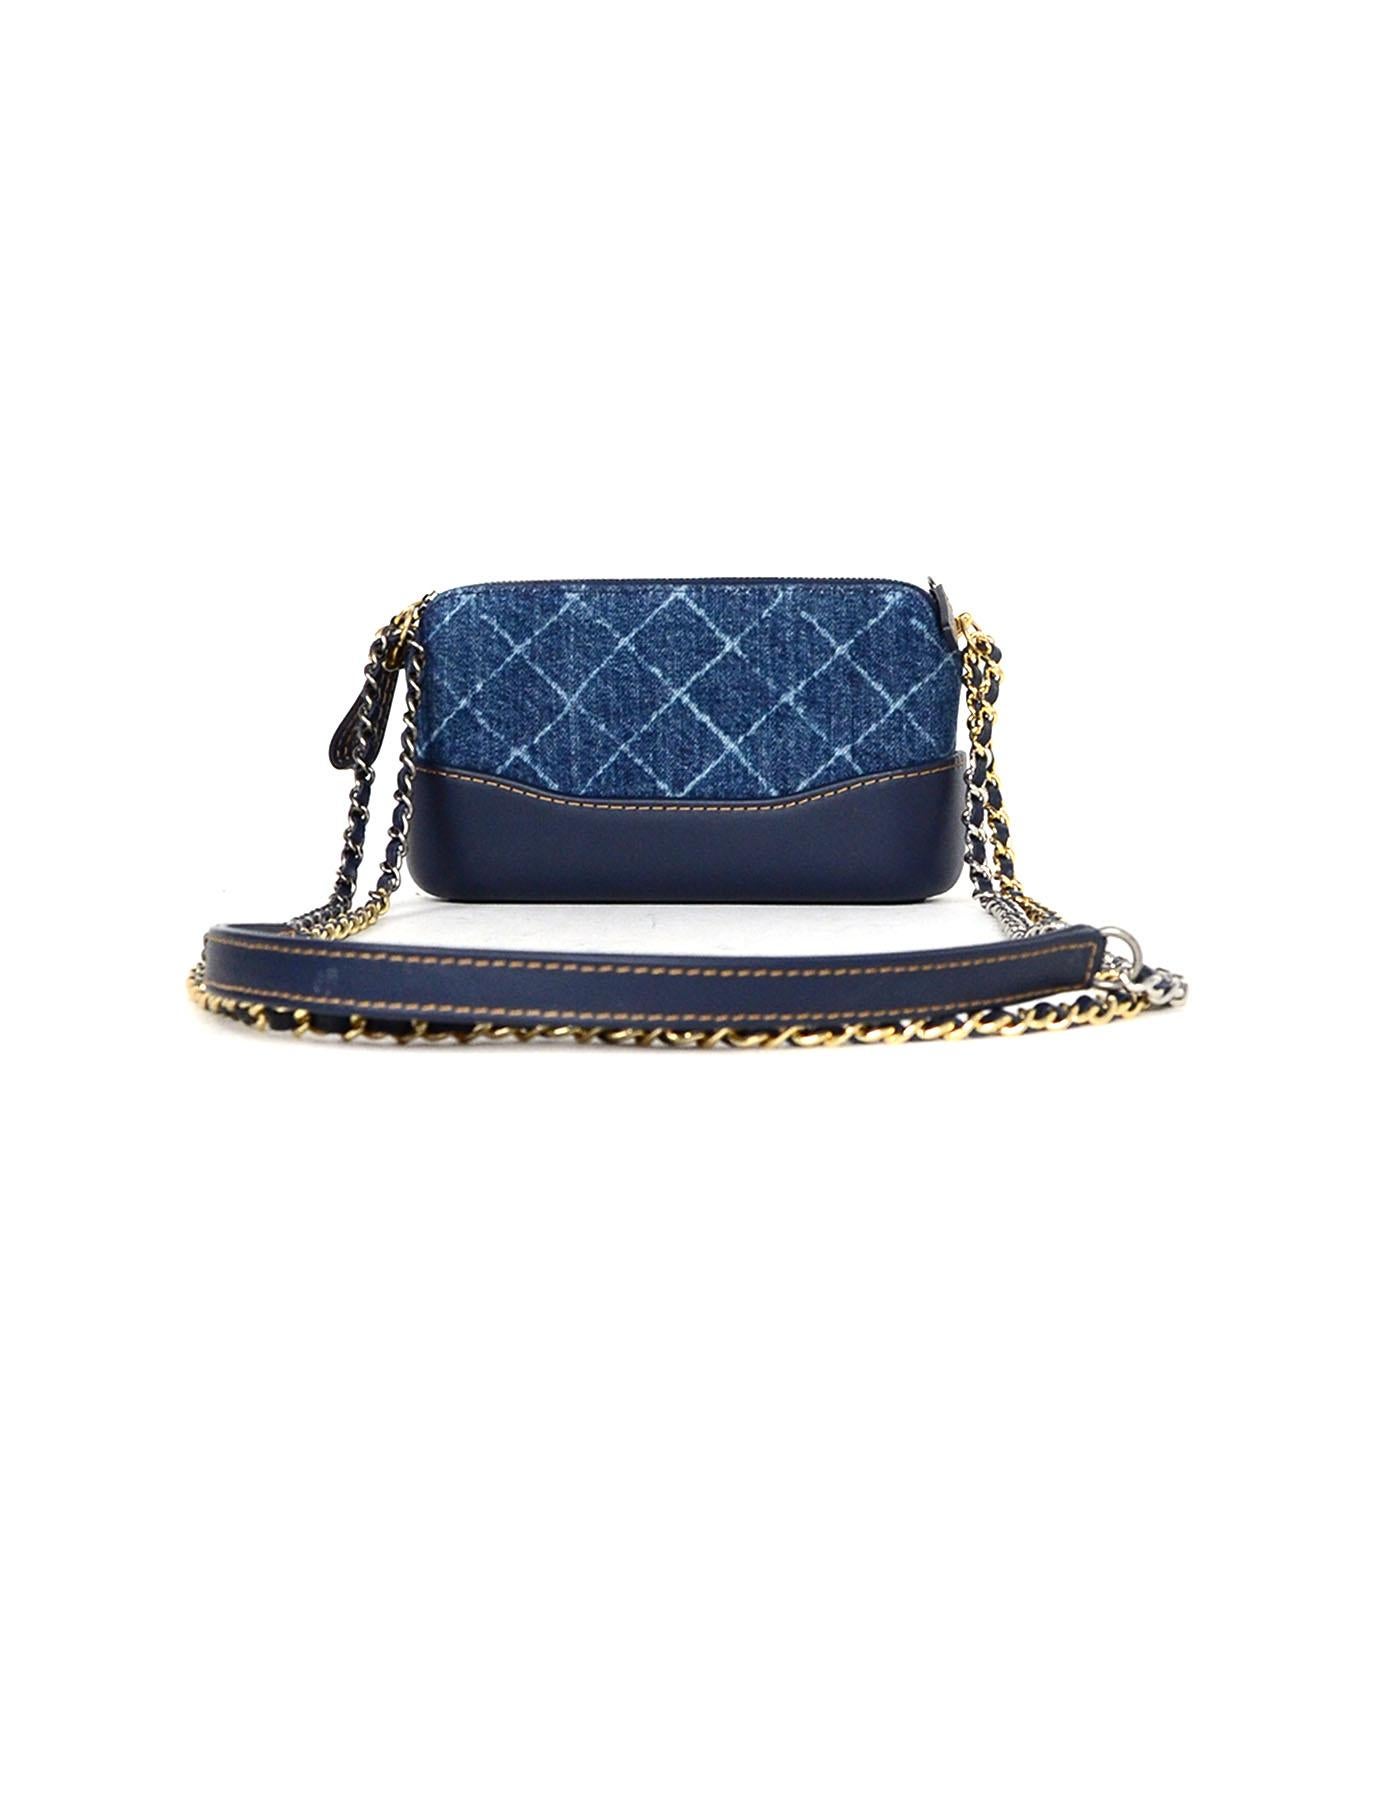 Women's Chanel 2018 Blue Denim Quilted Small Gabrielle Clutch with Chain Crossbody Bag